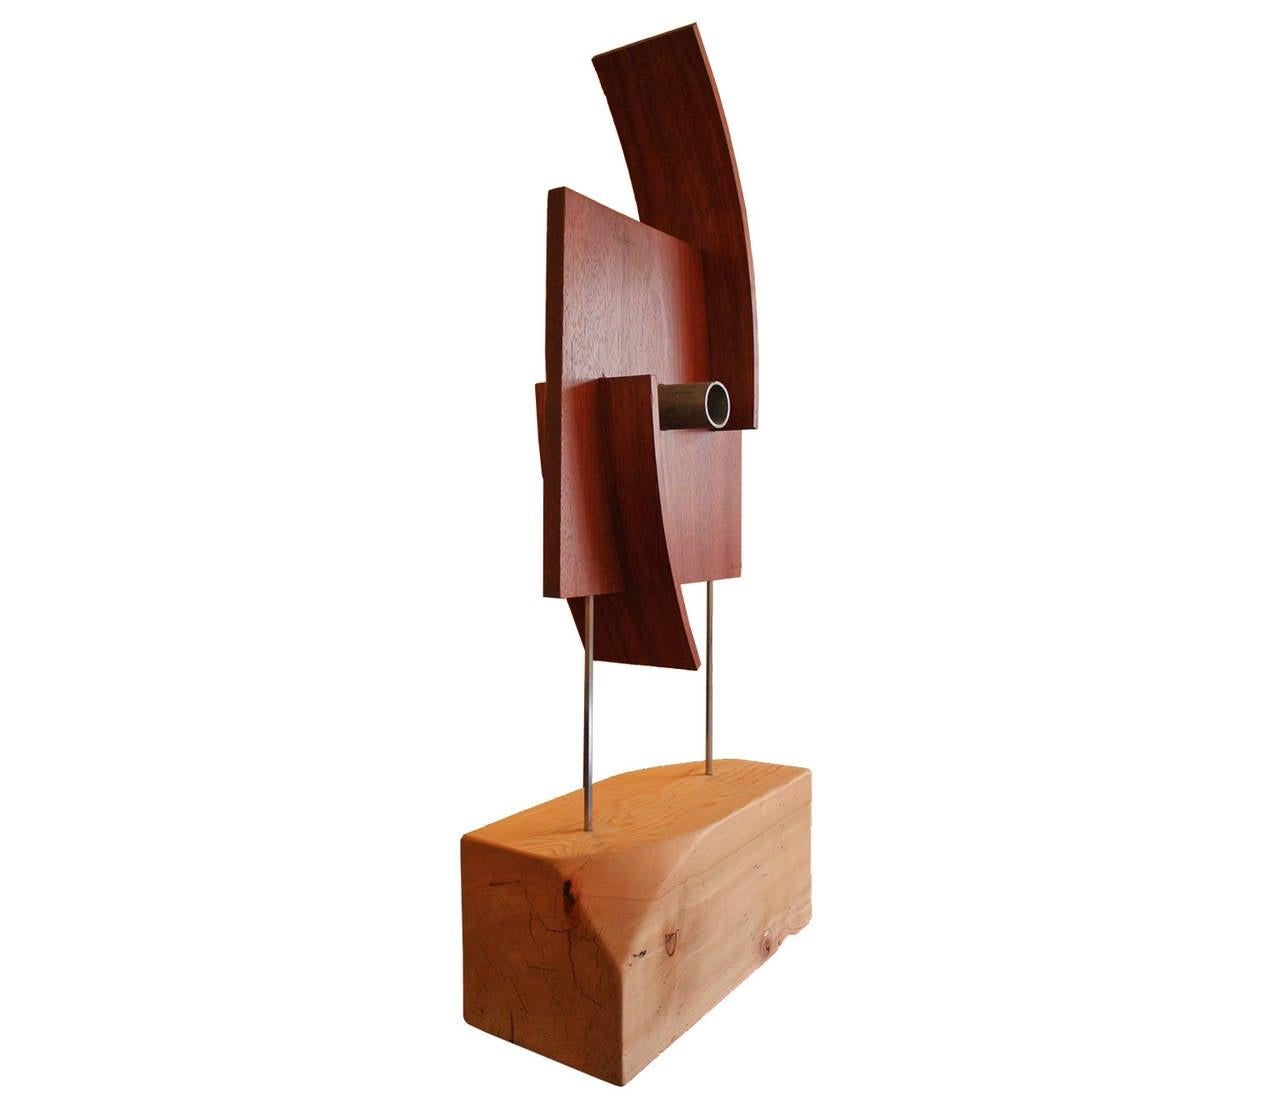 Unique industrial wooden sculpture made in a modern organic style. The wood is of high quality and the top piece is detectable from the base.